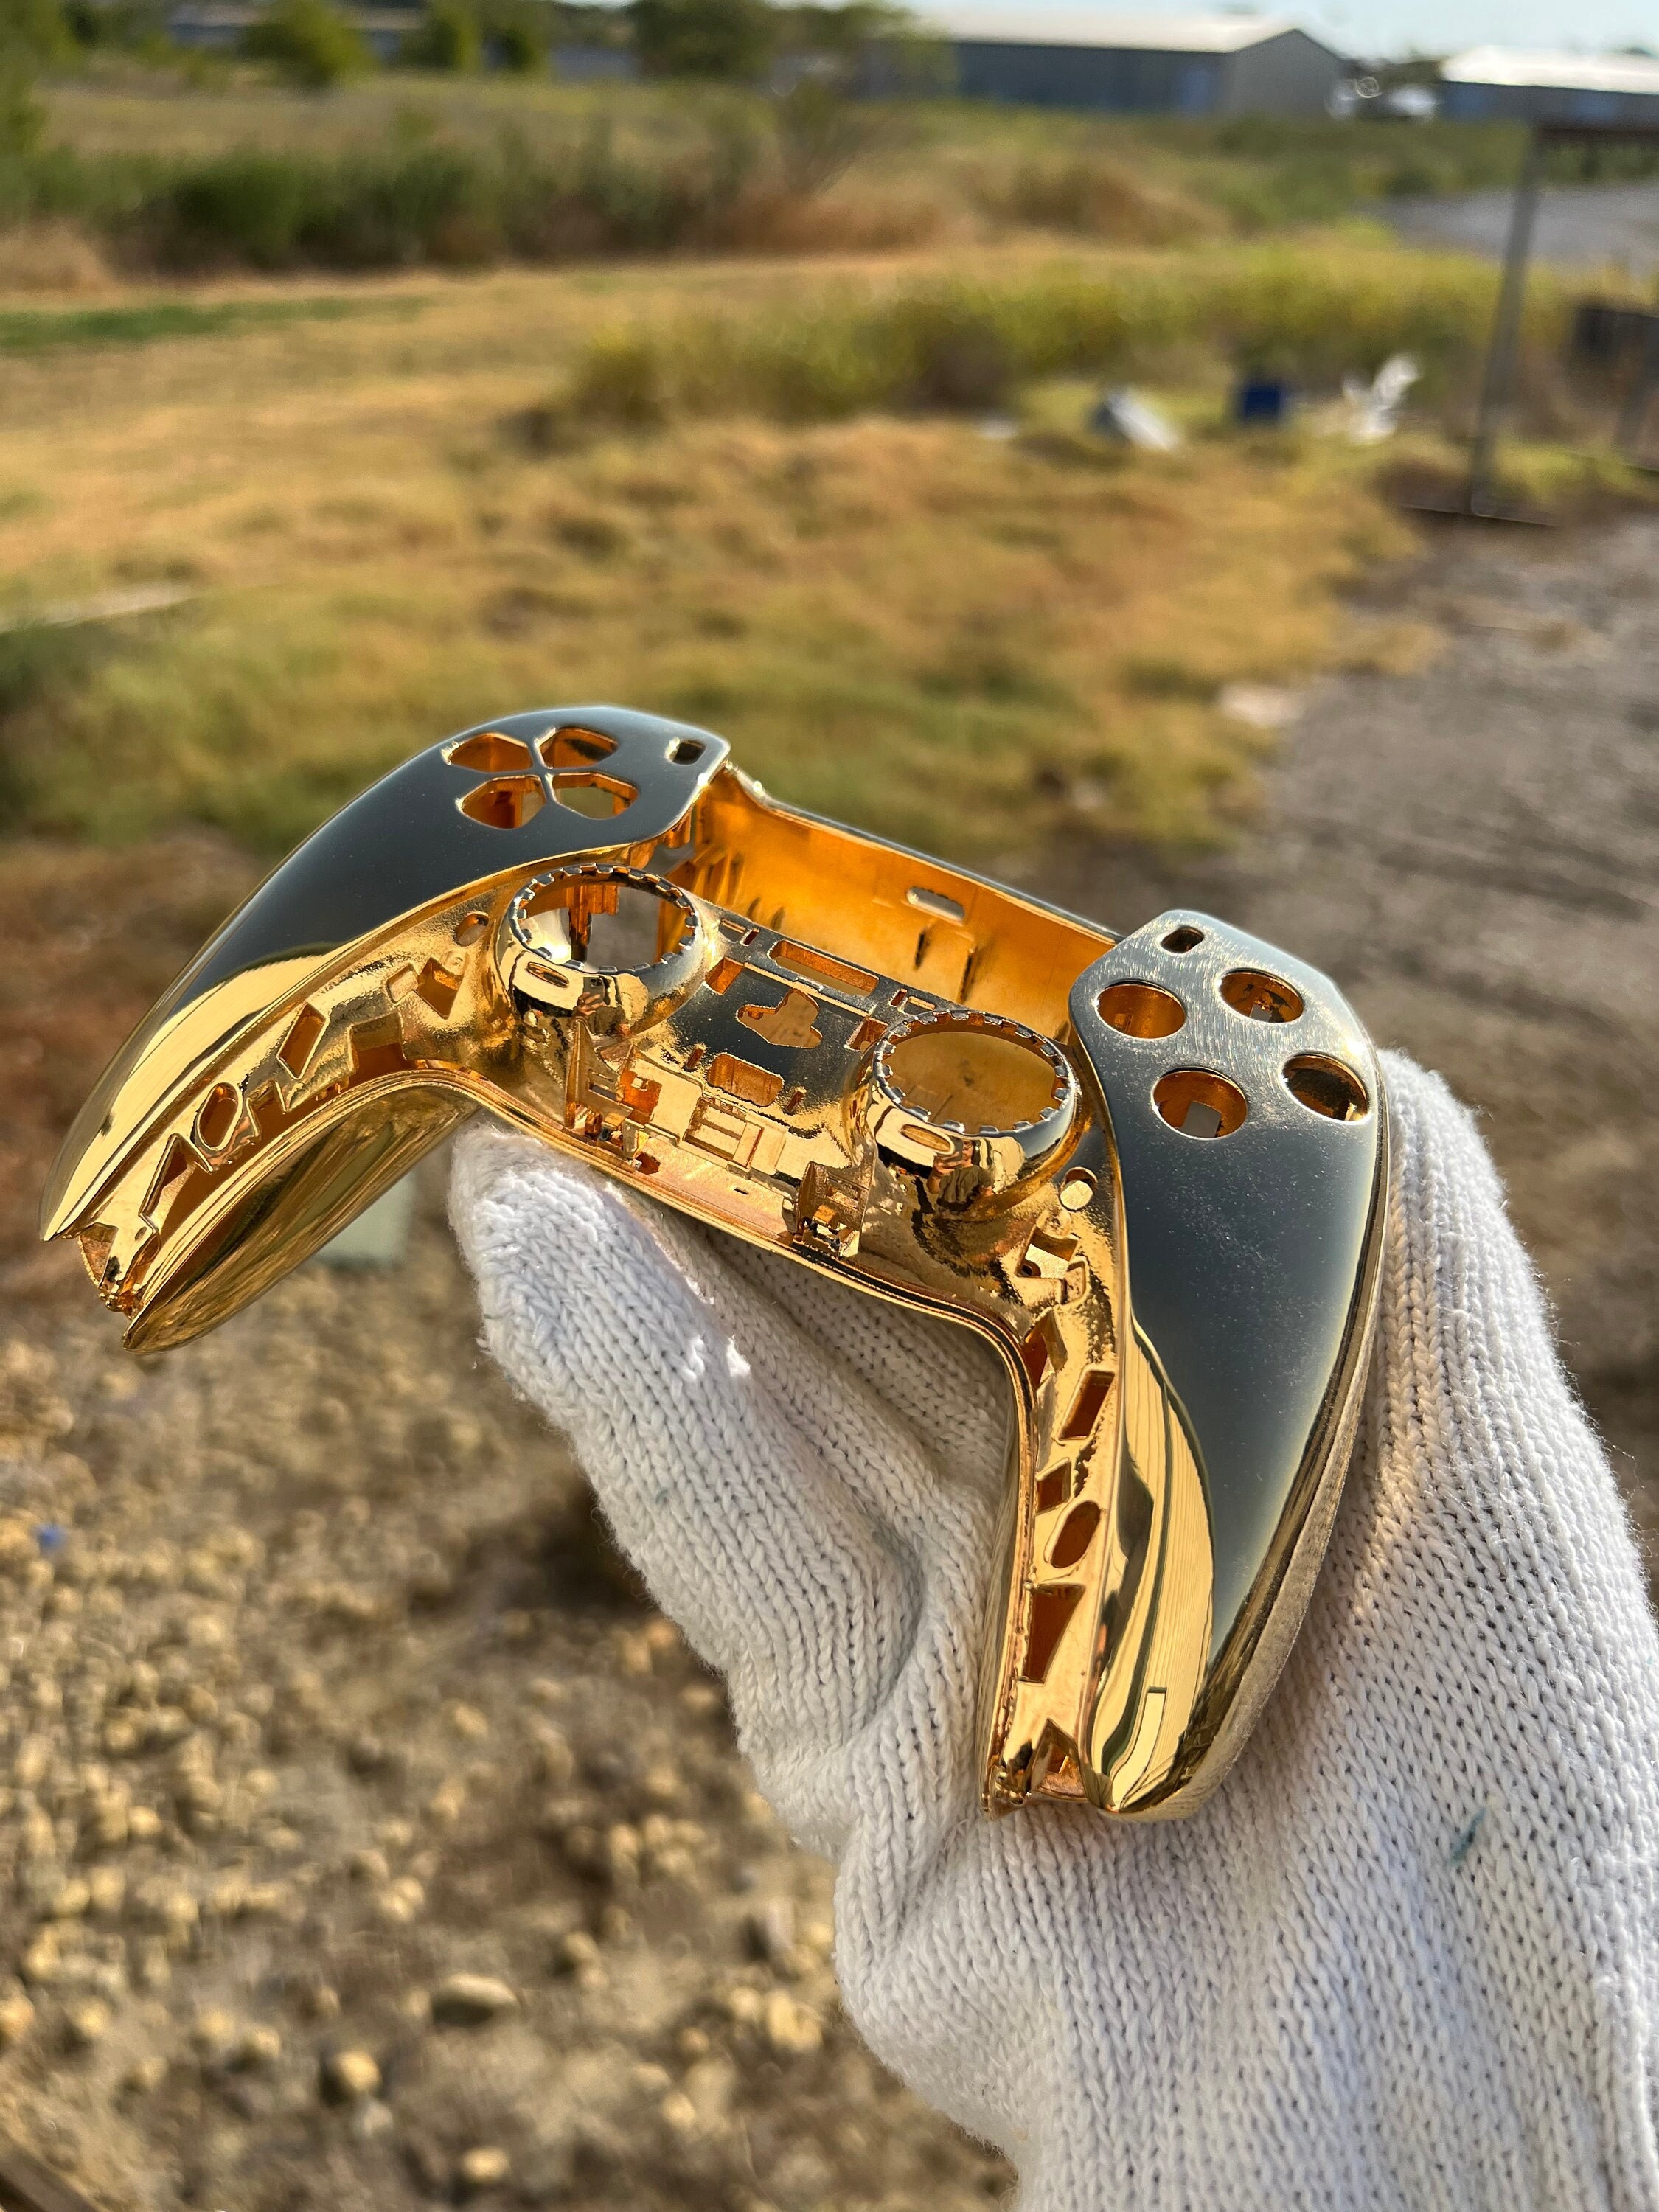 The Gold PS5 Controller - GeekSNG